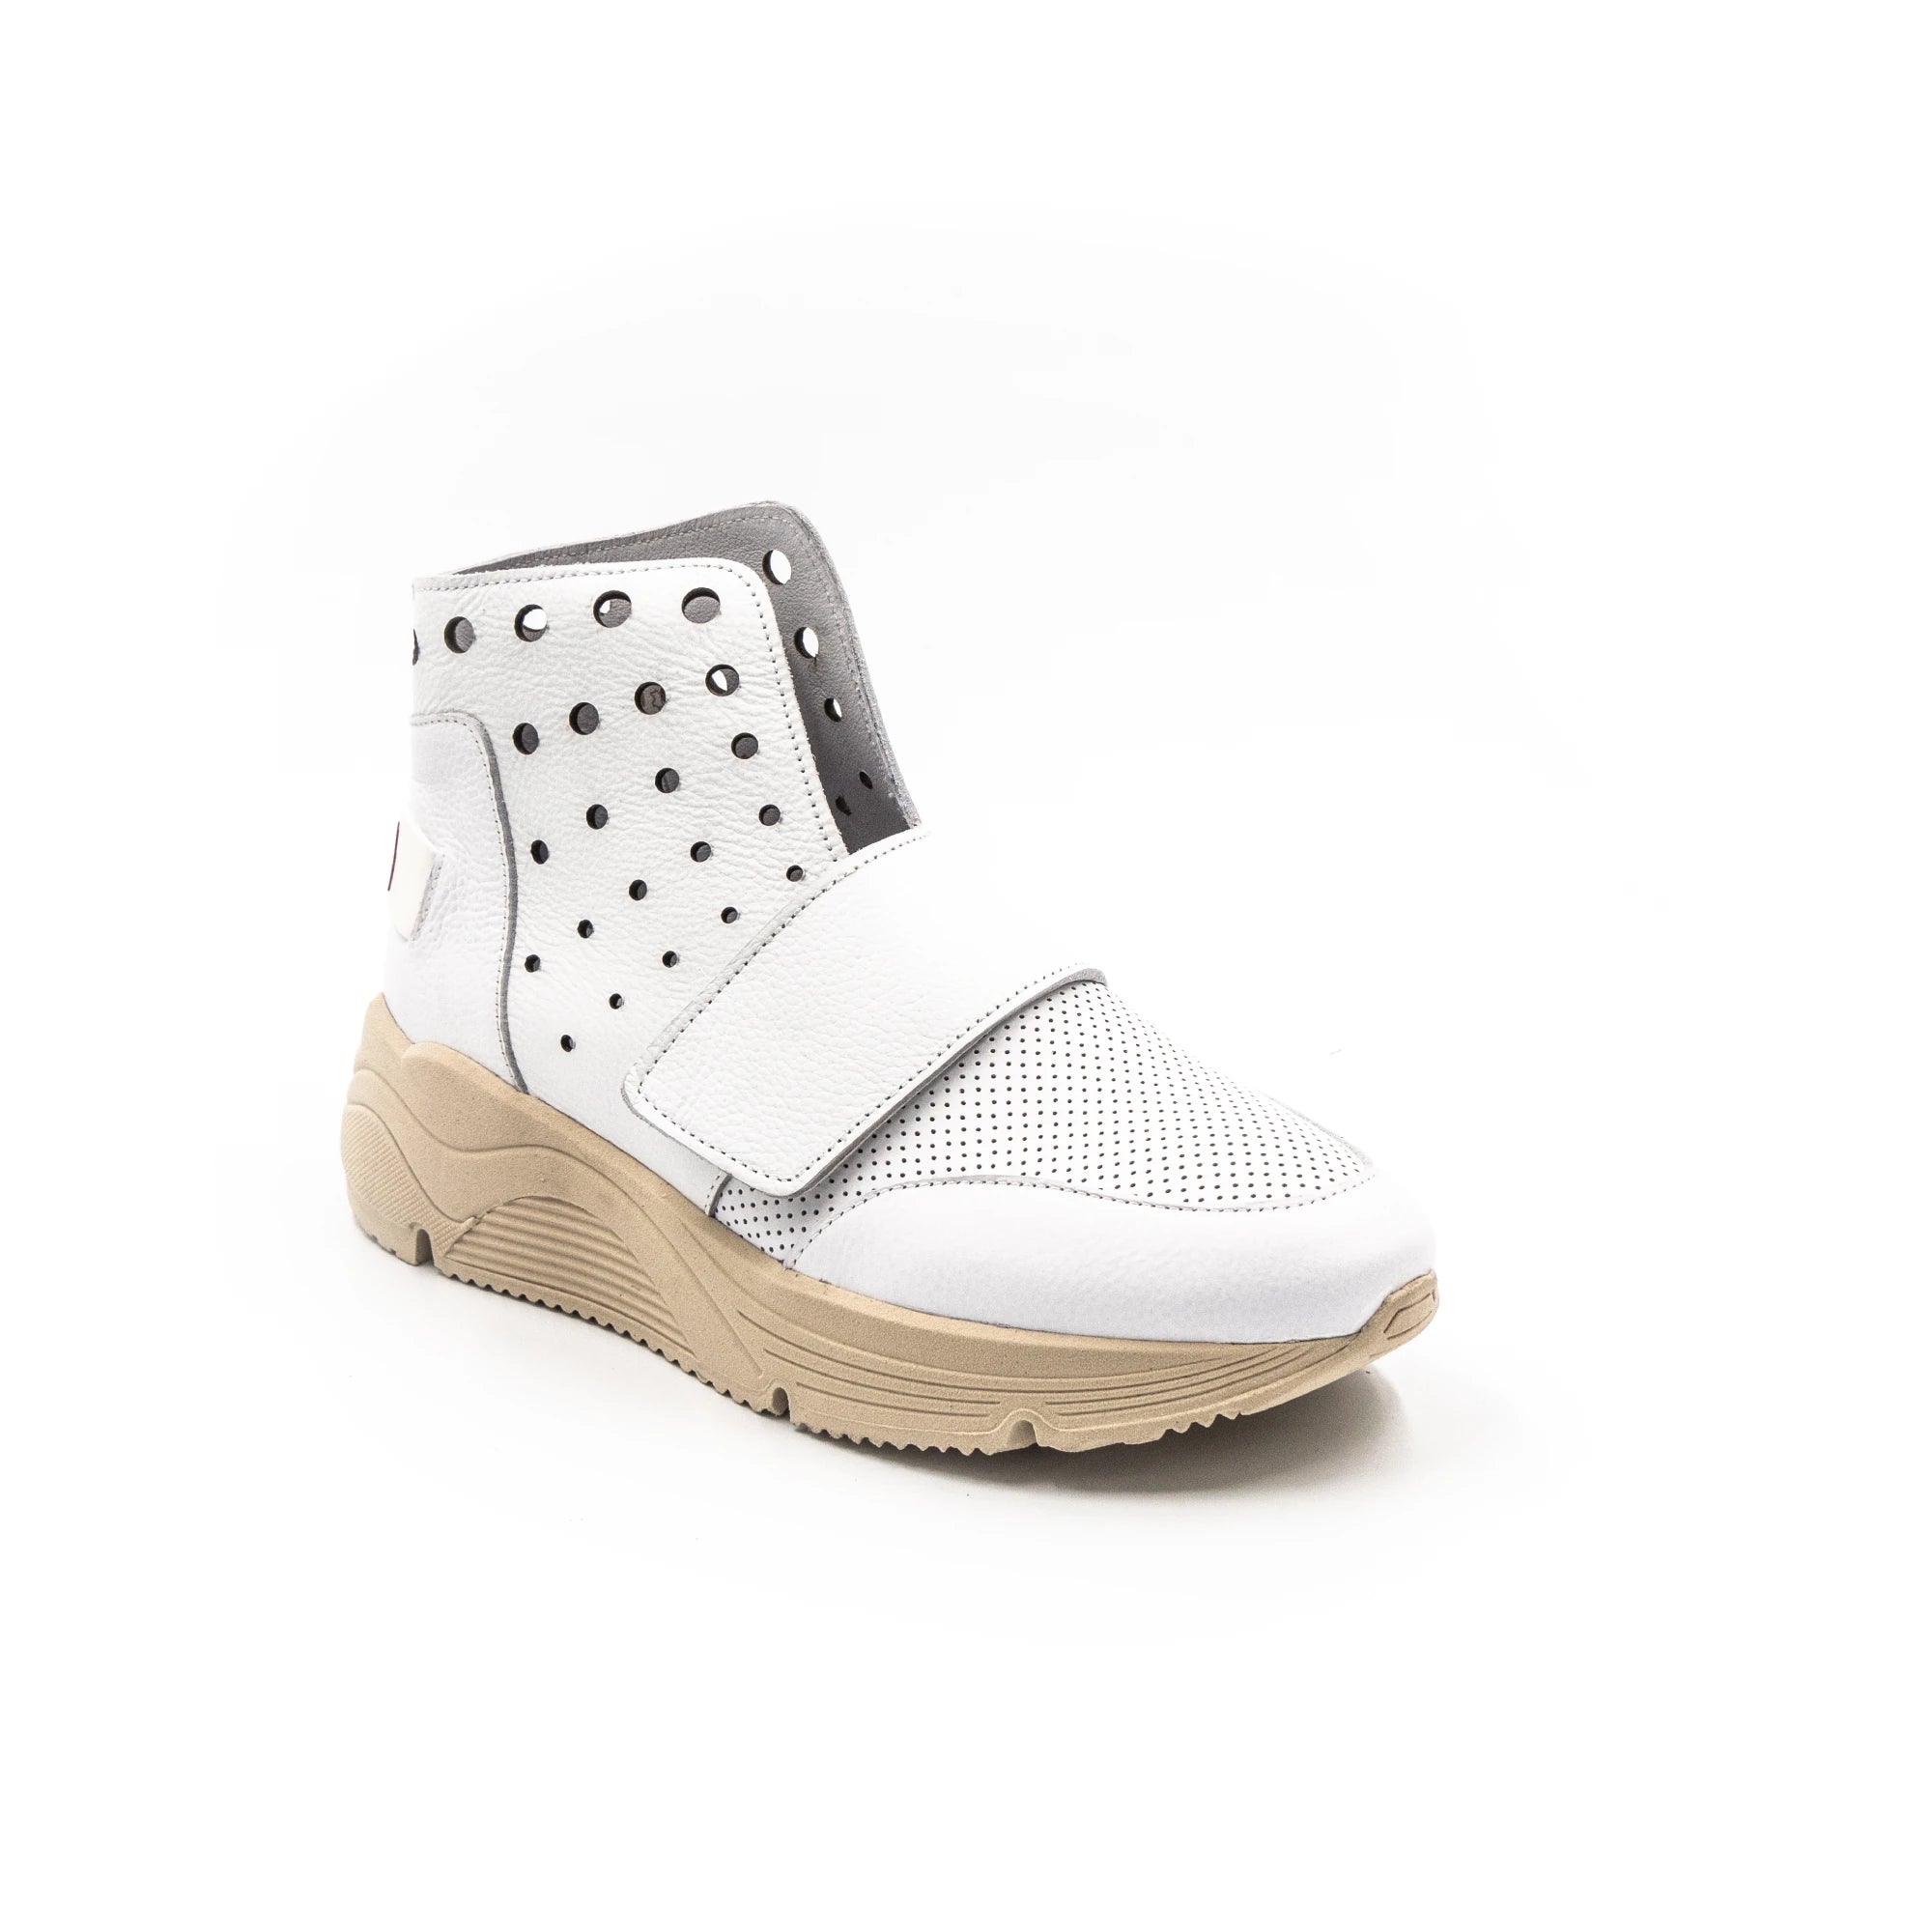 Perforated high-top sneakers, in white.